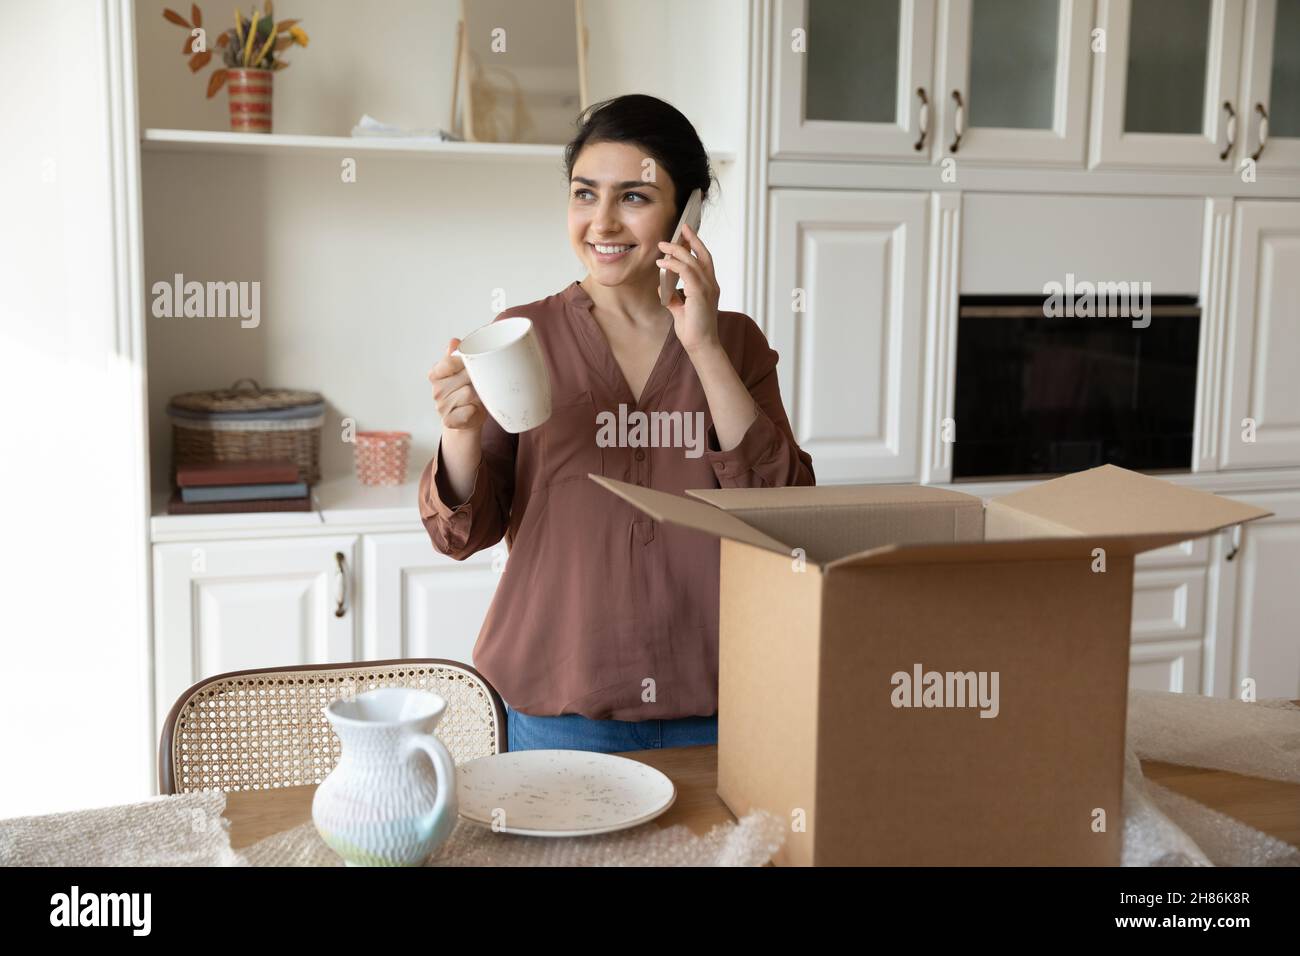 Smiling young indian woman holding phone call conversation, unpacking box. Stock Photo